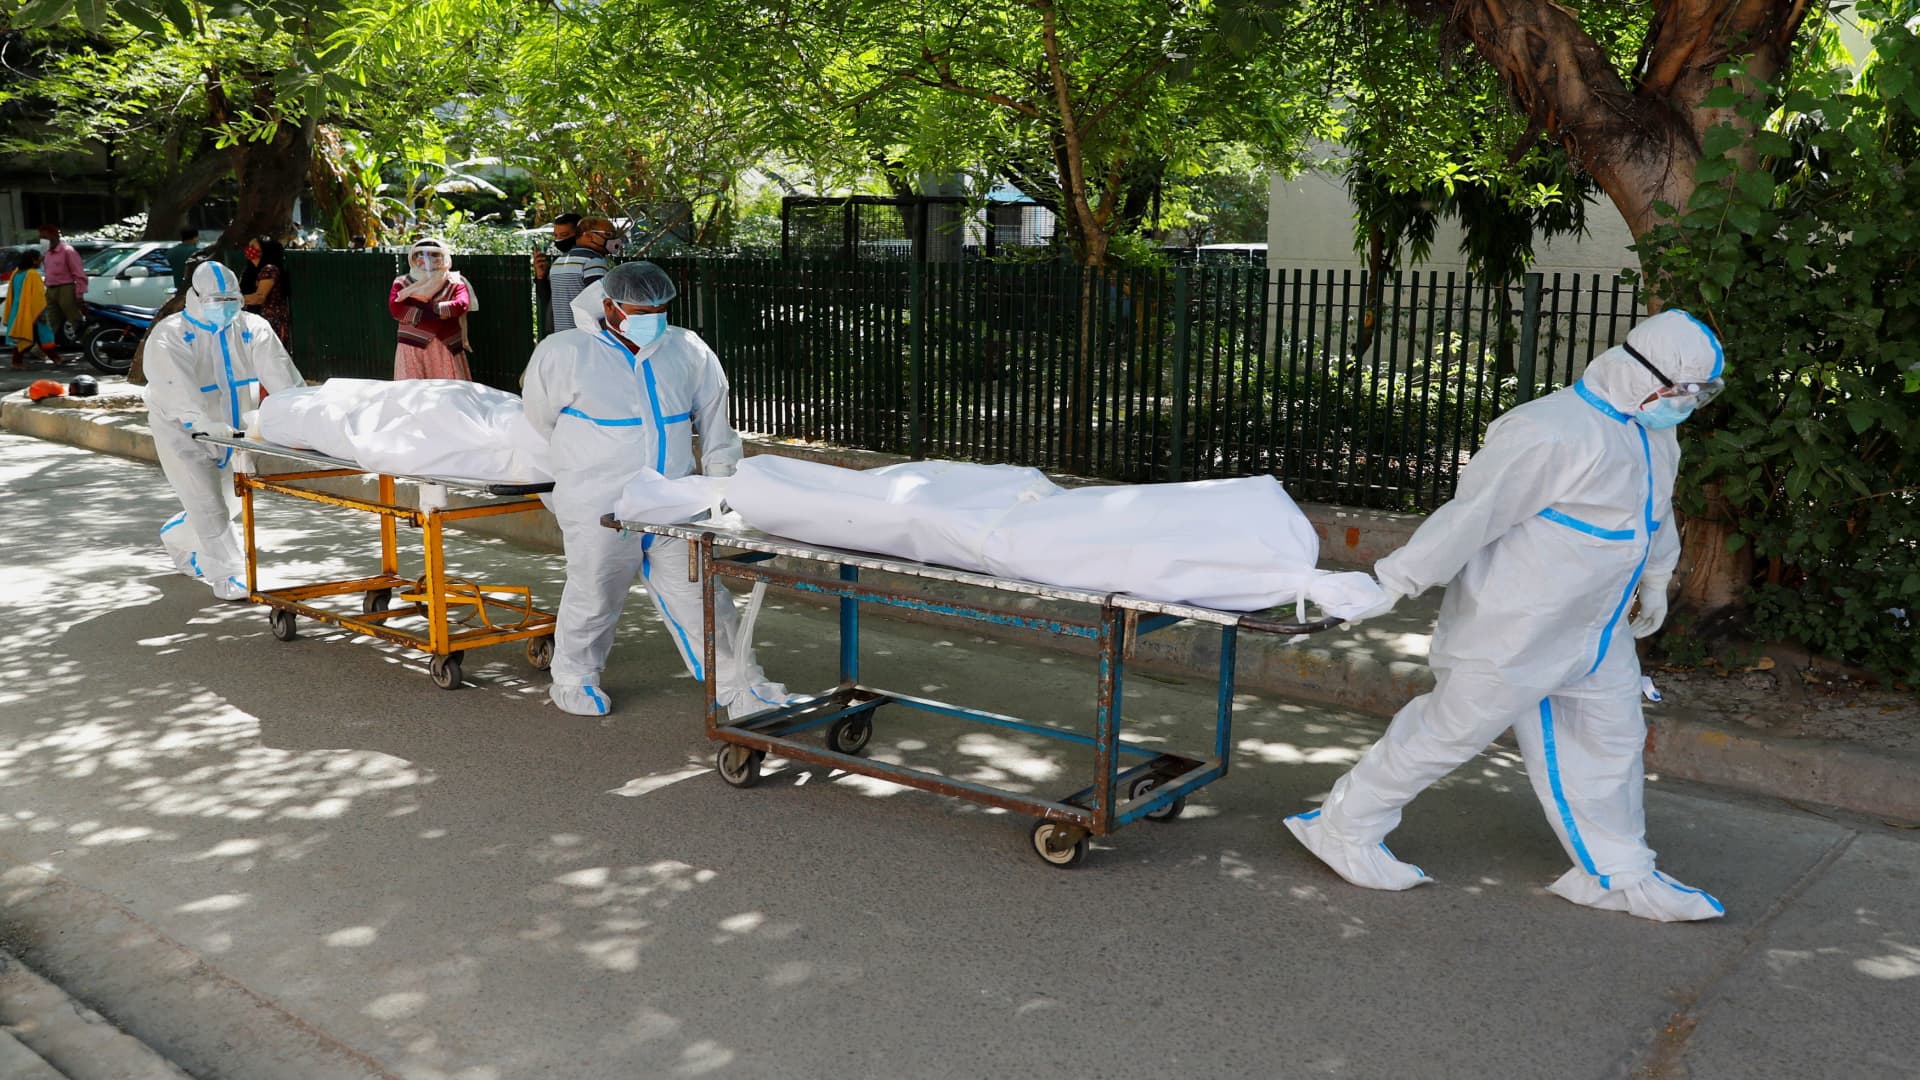 Health workers wearing personal protective equipment (PPE) carry bodies of people who were suffering from the coronavirus disease (COVID-19), outside the Guru Teg Bahadur hospital, in New Delhi, India, April 24, 2021.